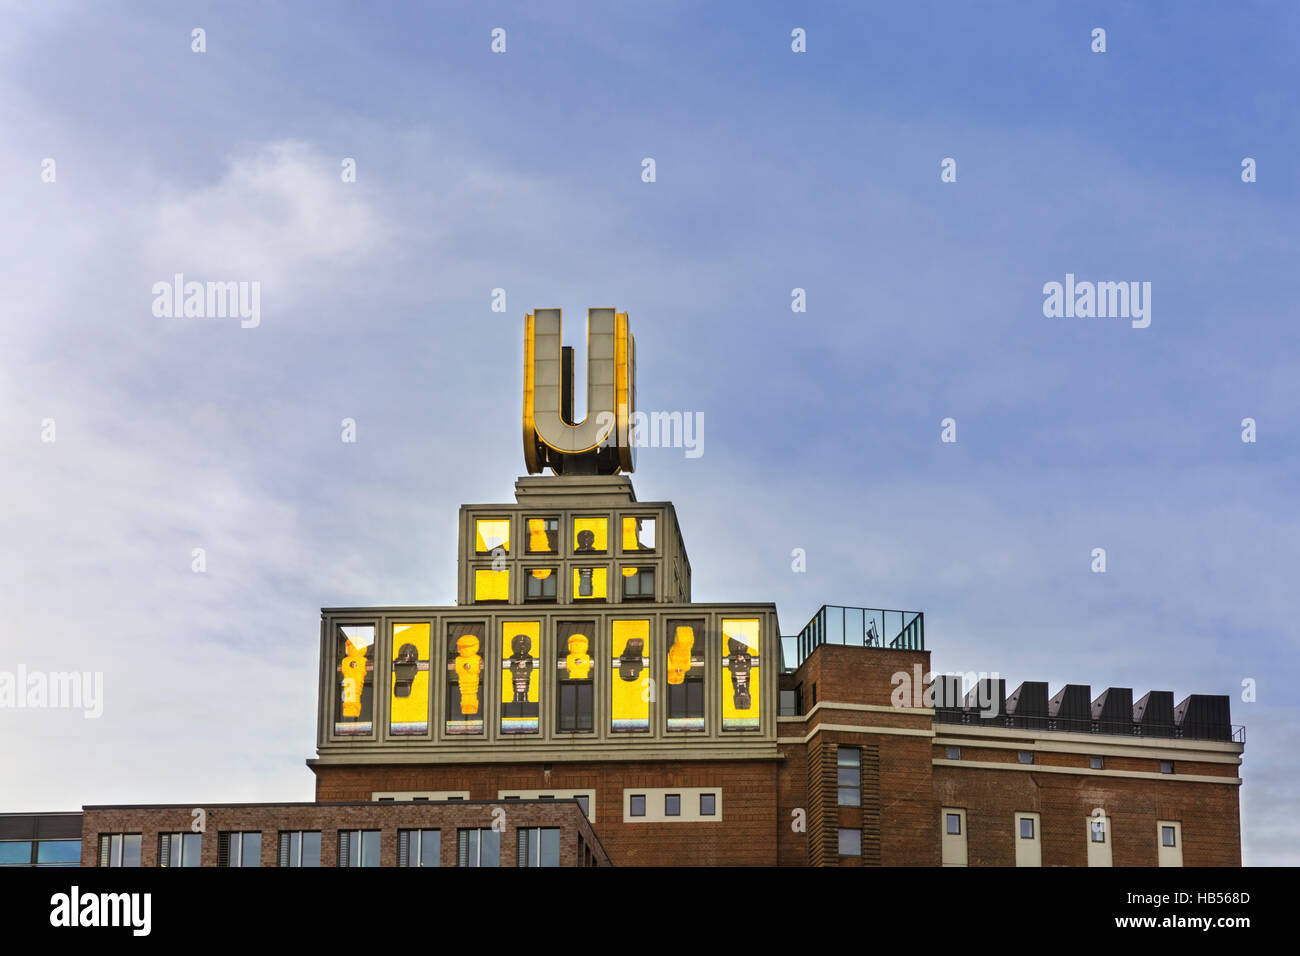 Dortmund U-Tower or Dortmunder U with 'kicker'  video installation, famous sign on top of the former Union Brewery, Germany Stock Photo